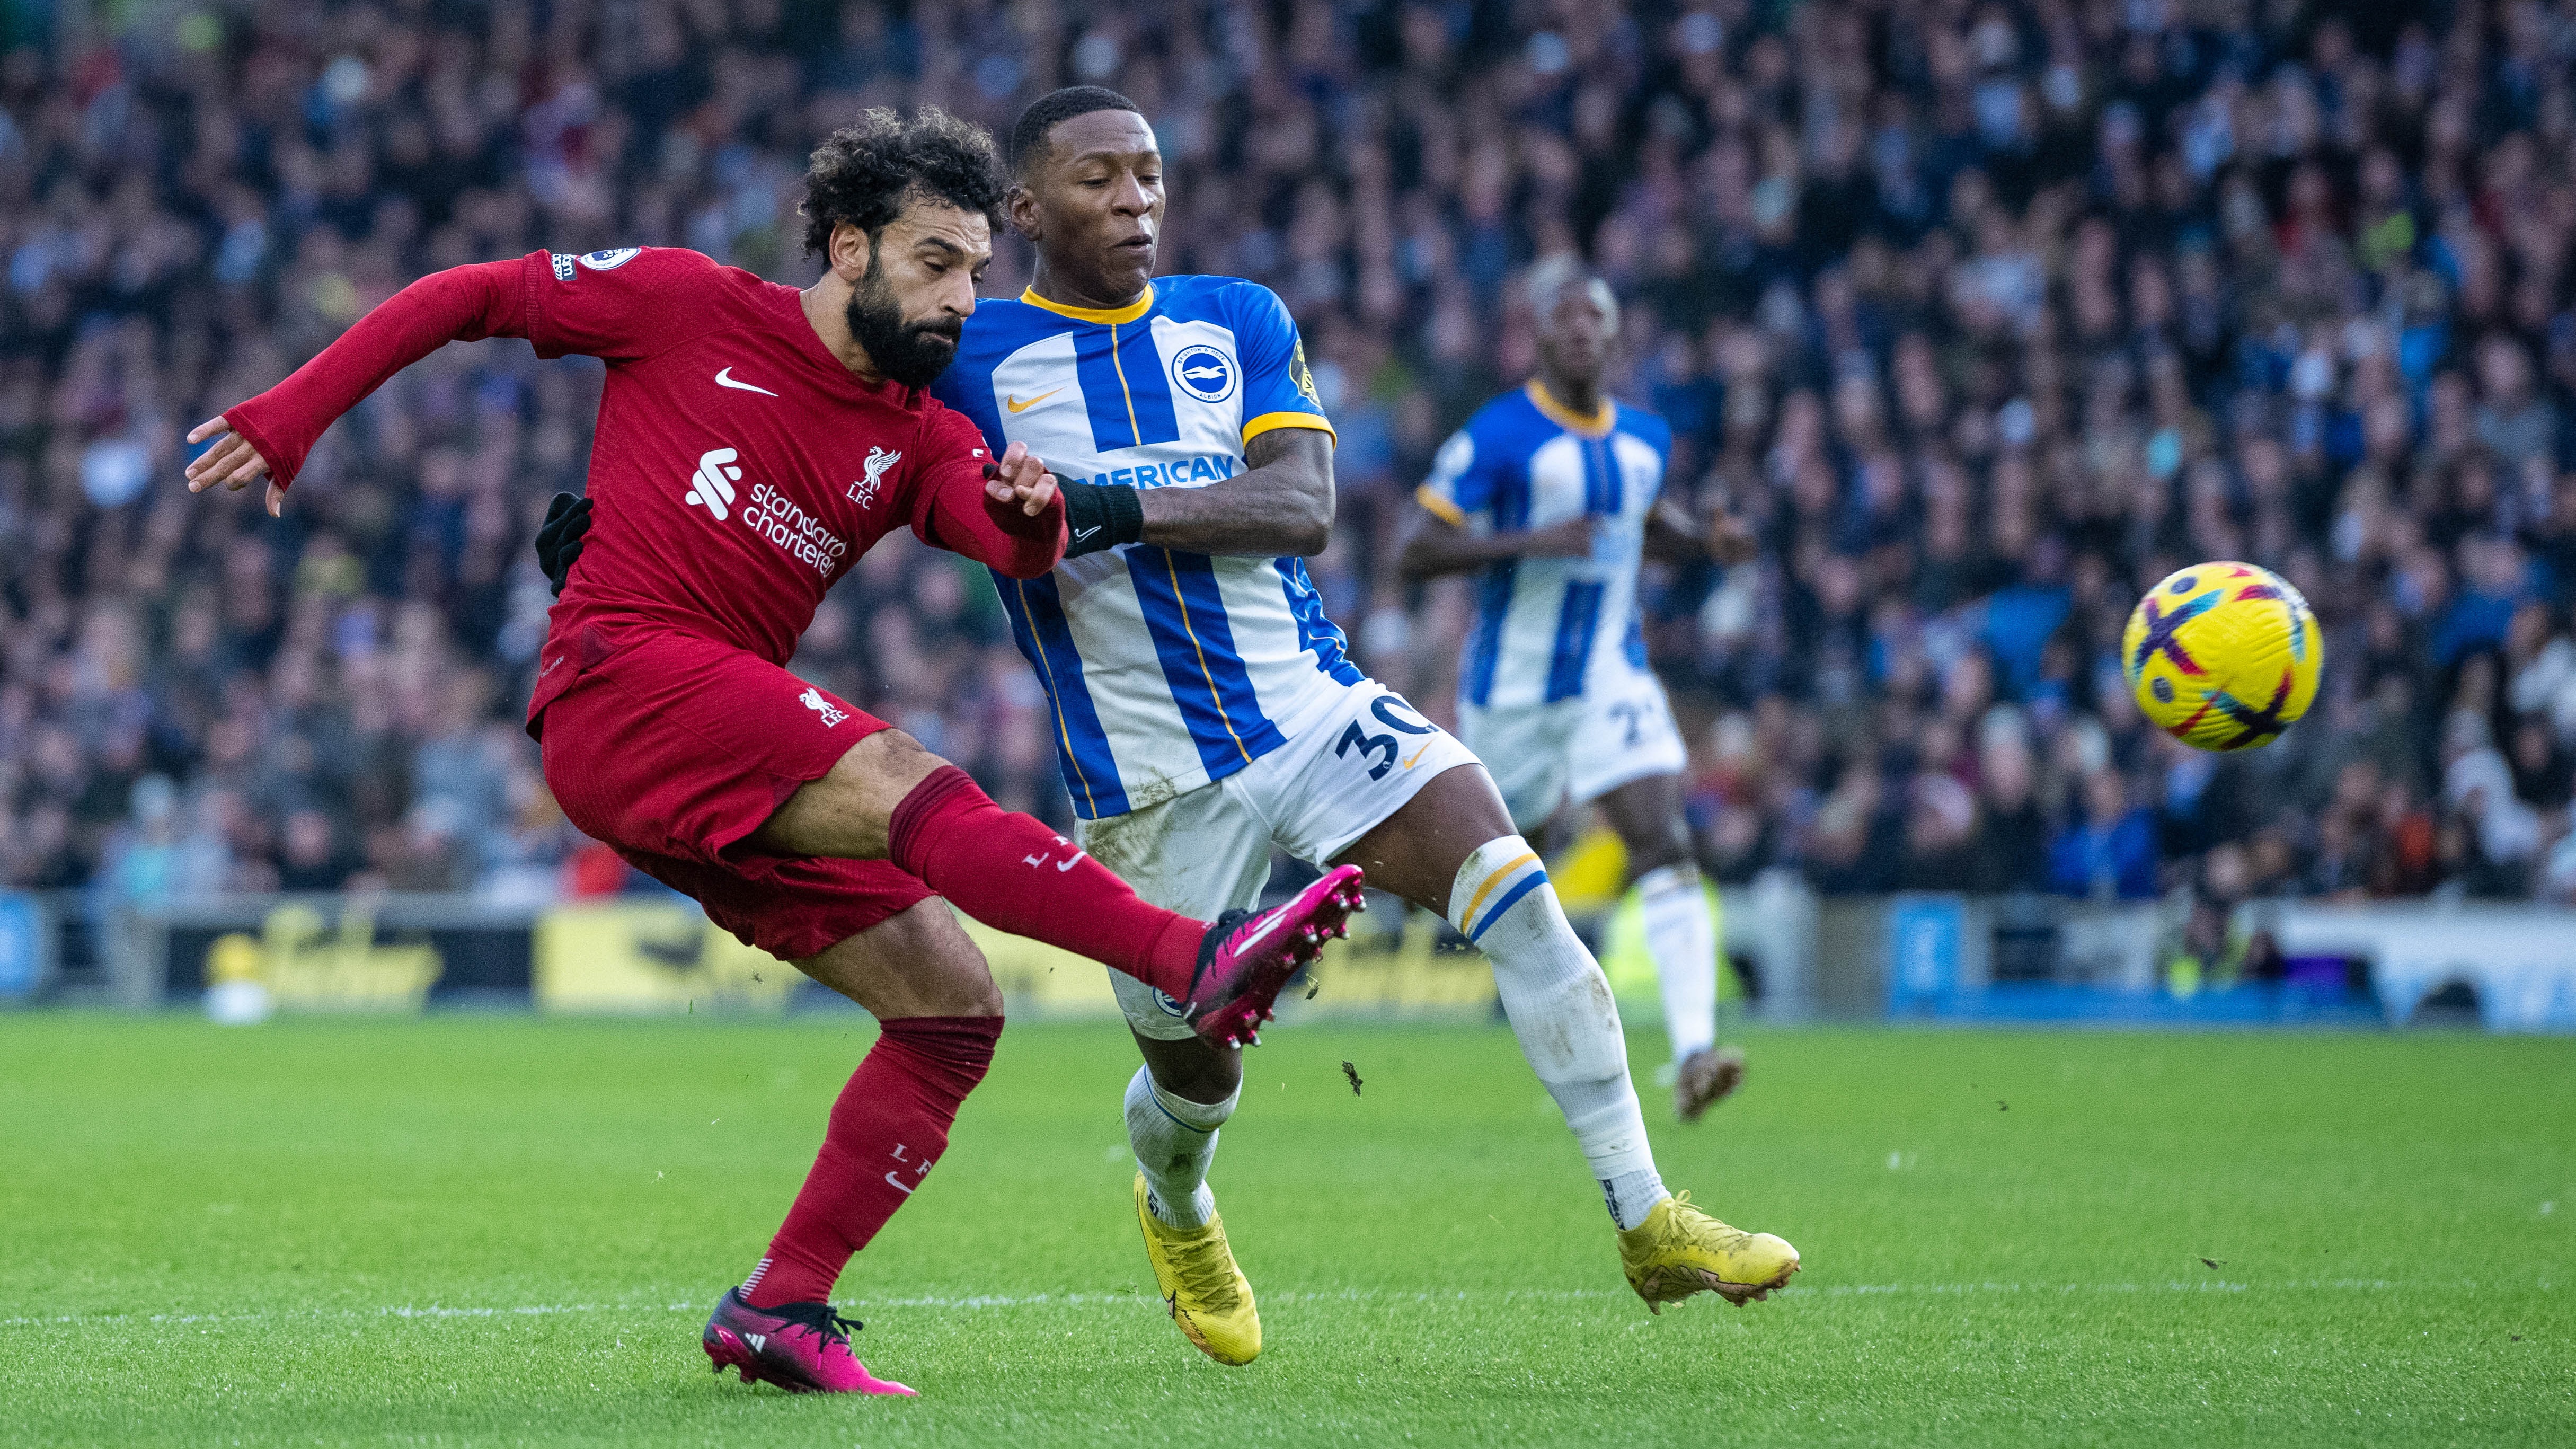 Brighton vs Liverpool live stream and how to watch the FA Cup fourth round online